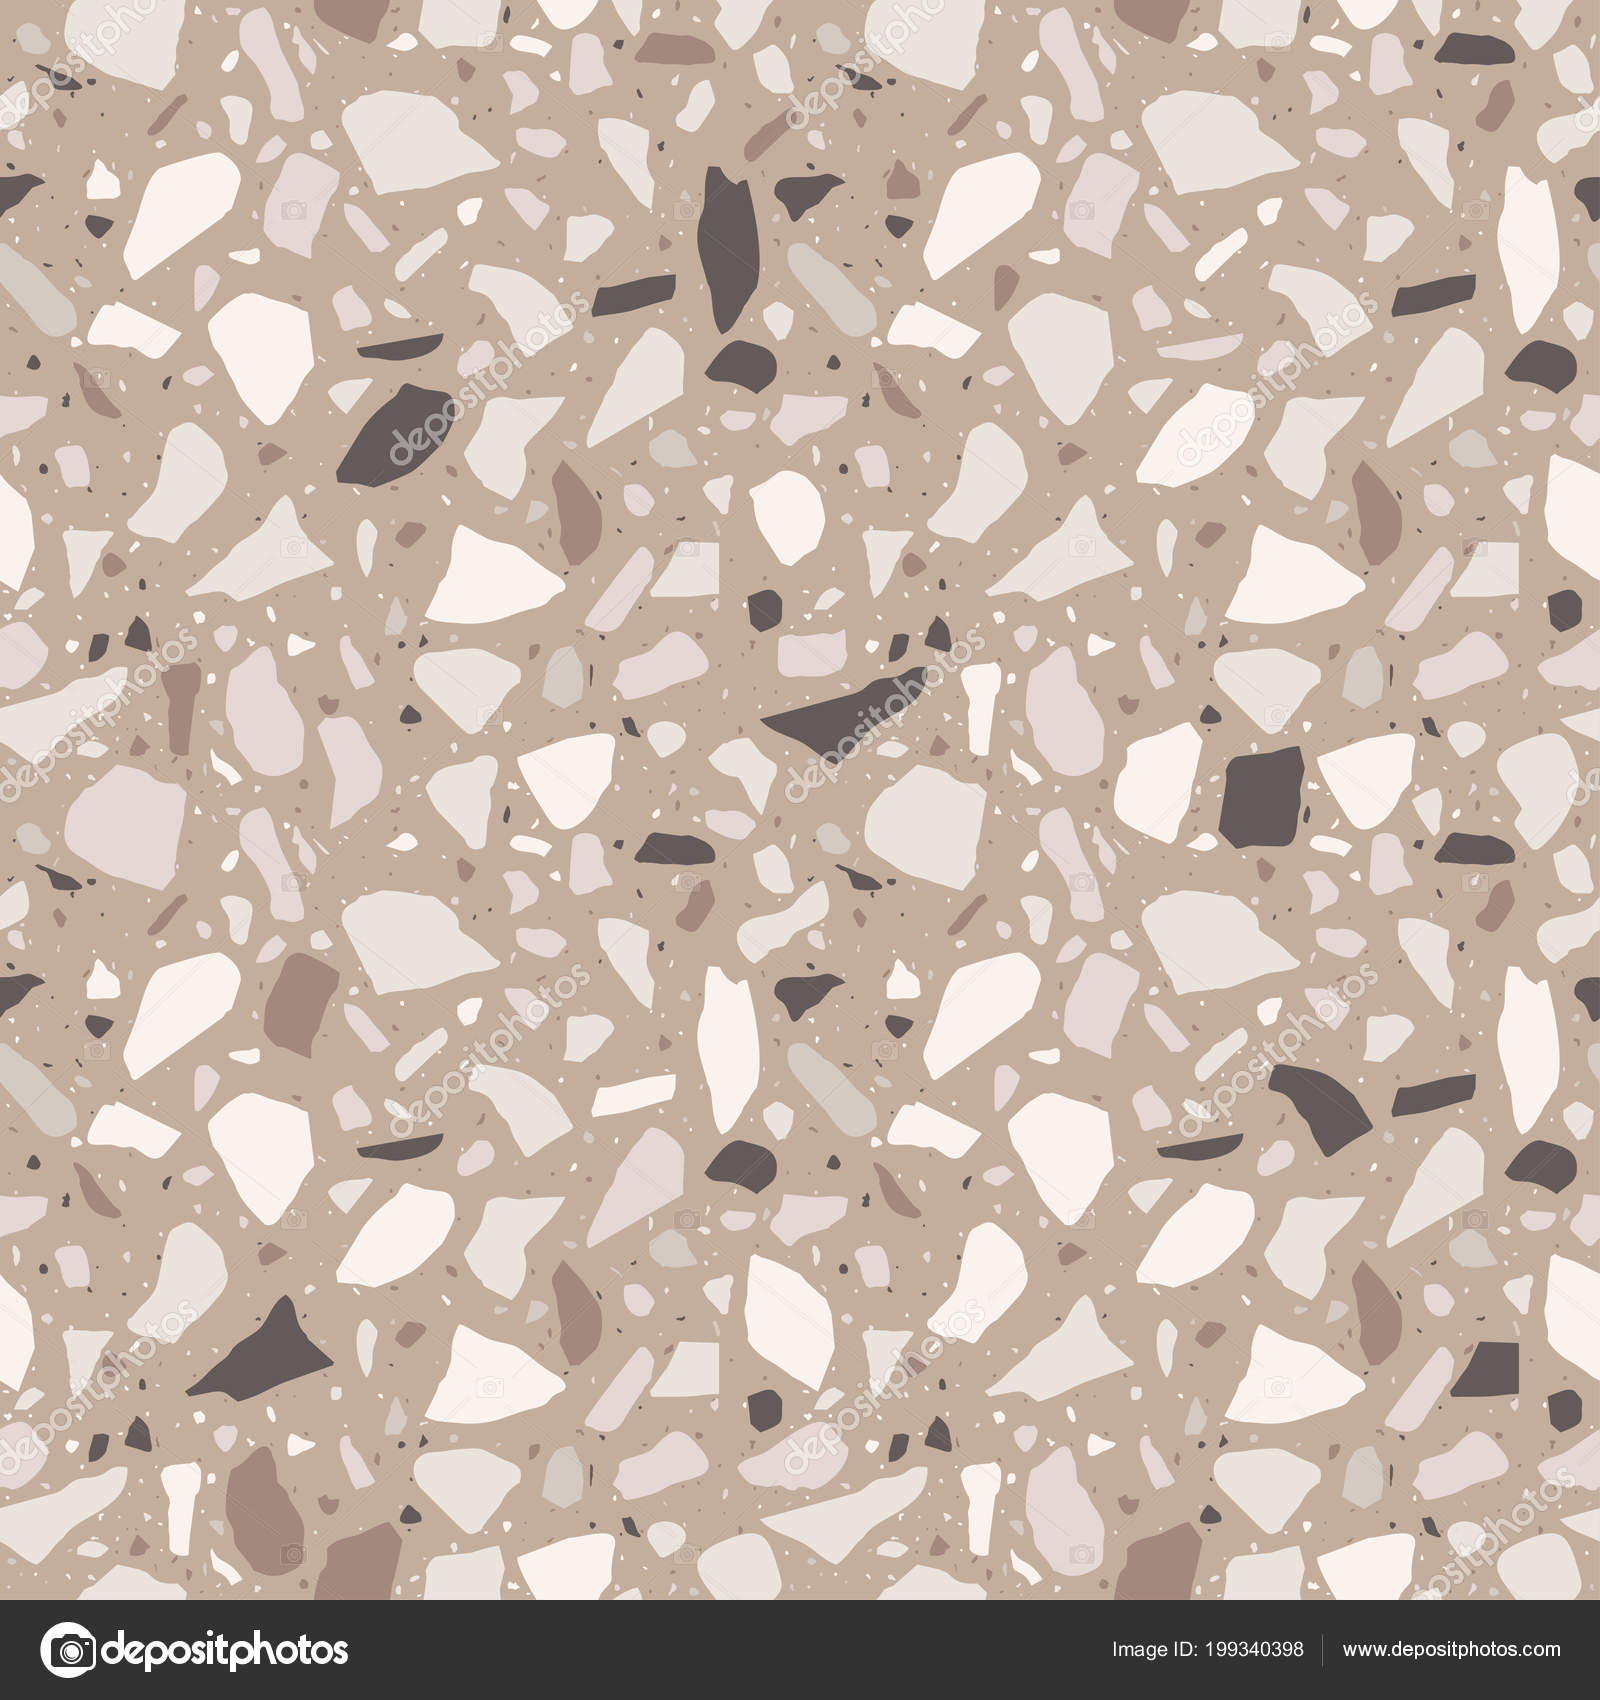 Download Terrazzo Seamless Pattern Tile Pebbles Stone Abstract Texture Background Wrapping Vector Image By C Parmenow Vector Stock 199340398